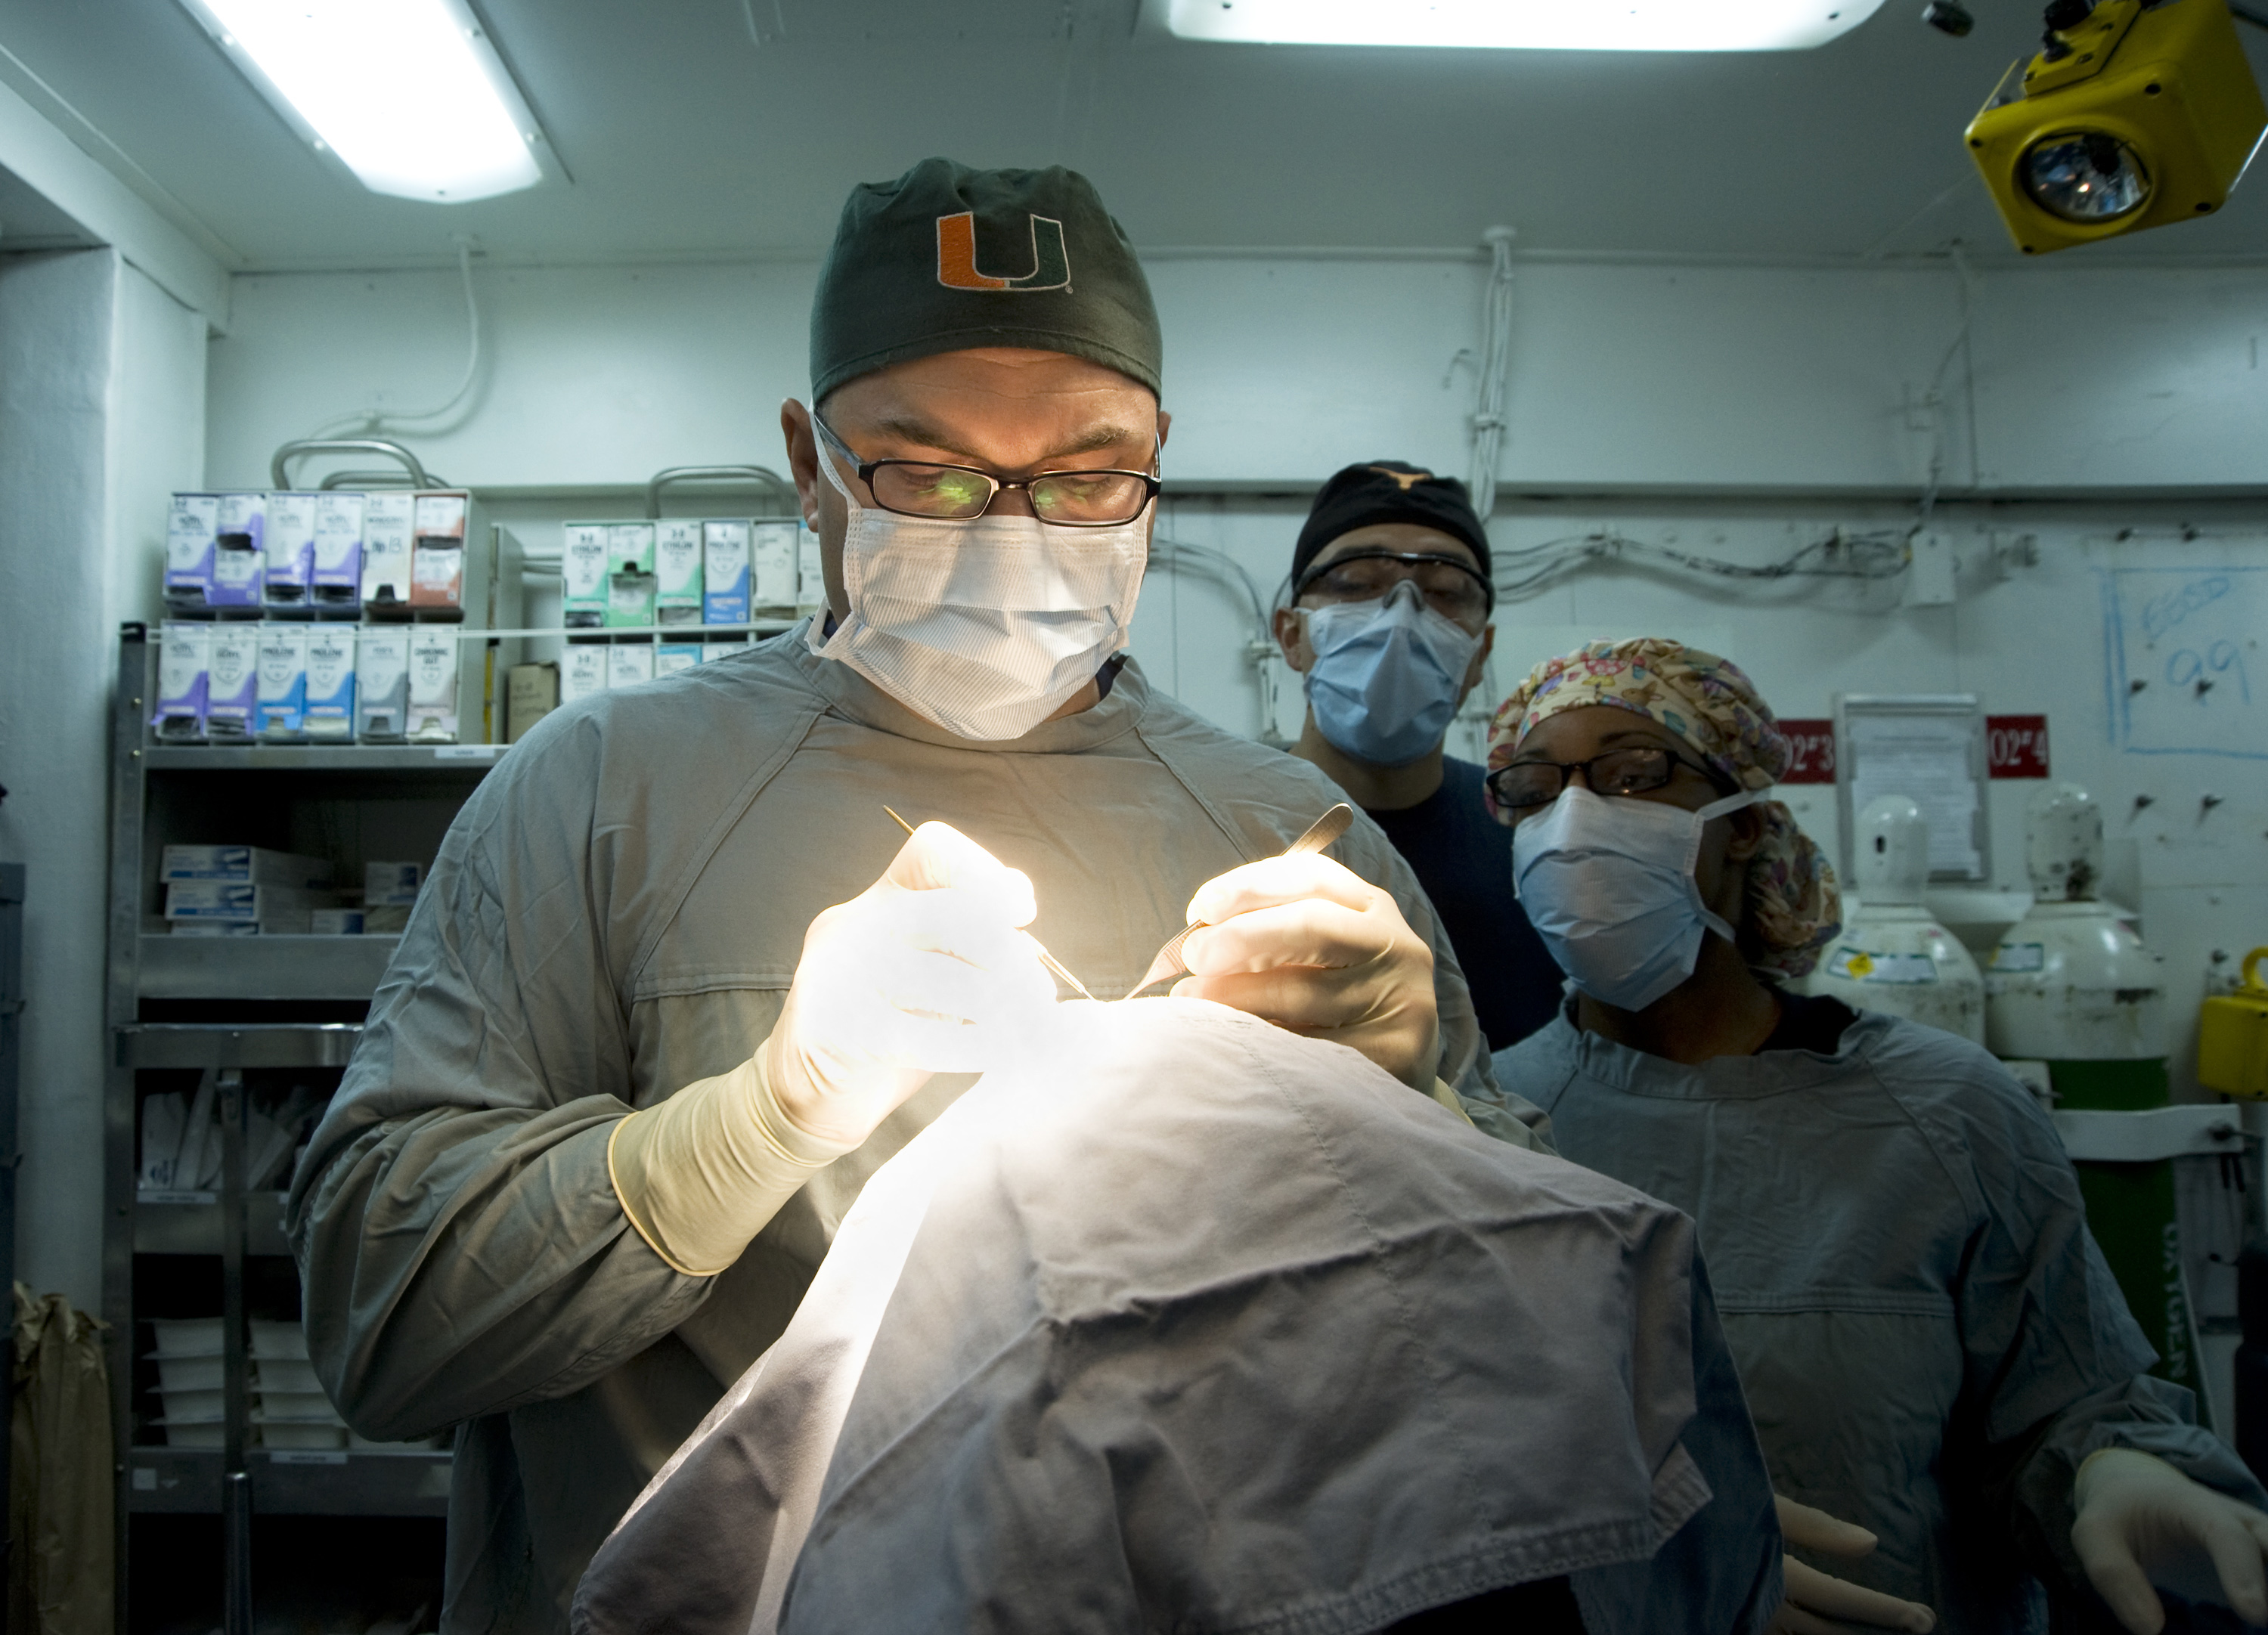 US Navy 120120-N-JN664-002 Lt. Cmdr. Howard Pryor, a Navy doctor, makes an incision into an epidermal inclusion cyst on the head of a patient in th